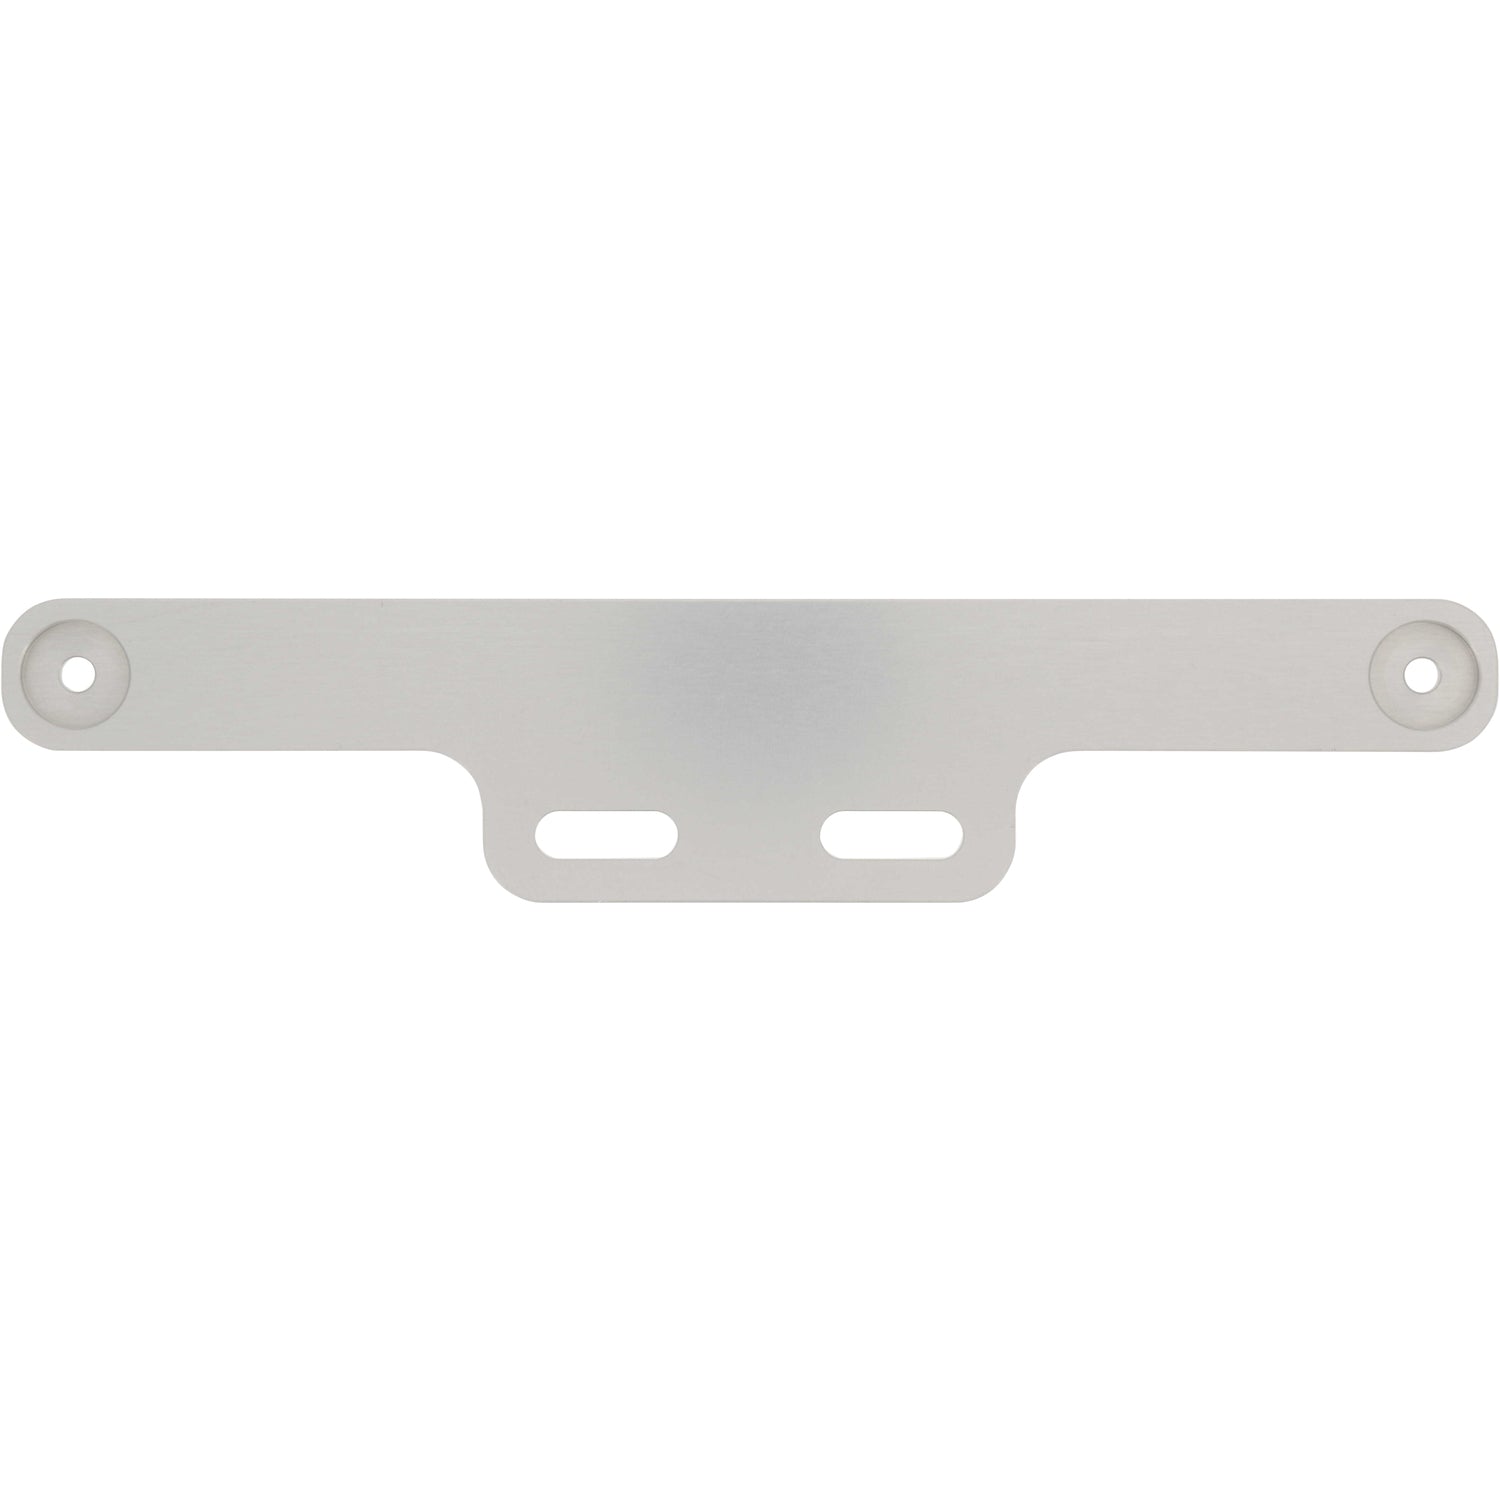 Grey hard anodized aluminum part with rounded edges and a recessed hole cut into each end. Two slotted holes are found on the part for mounting purposes. Part shown on white background. 